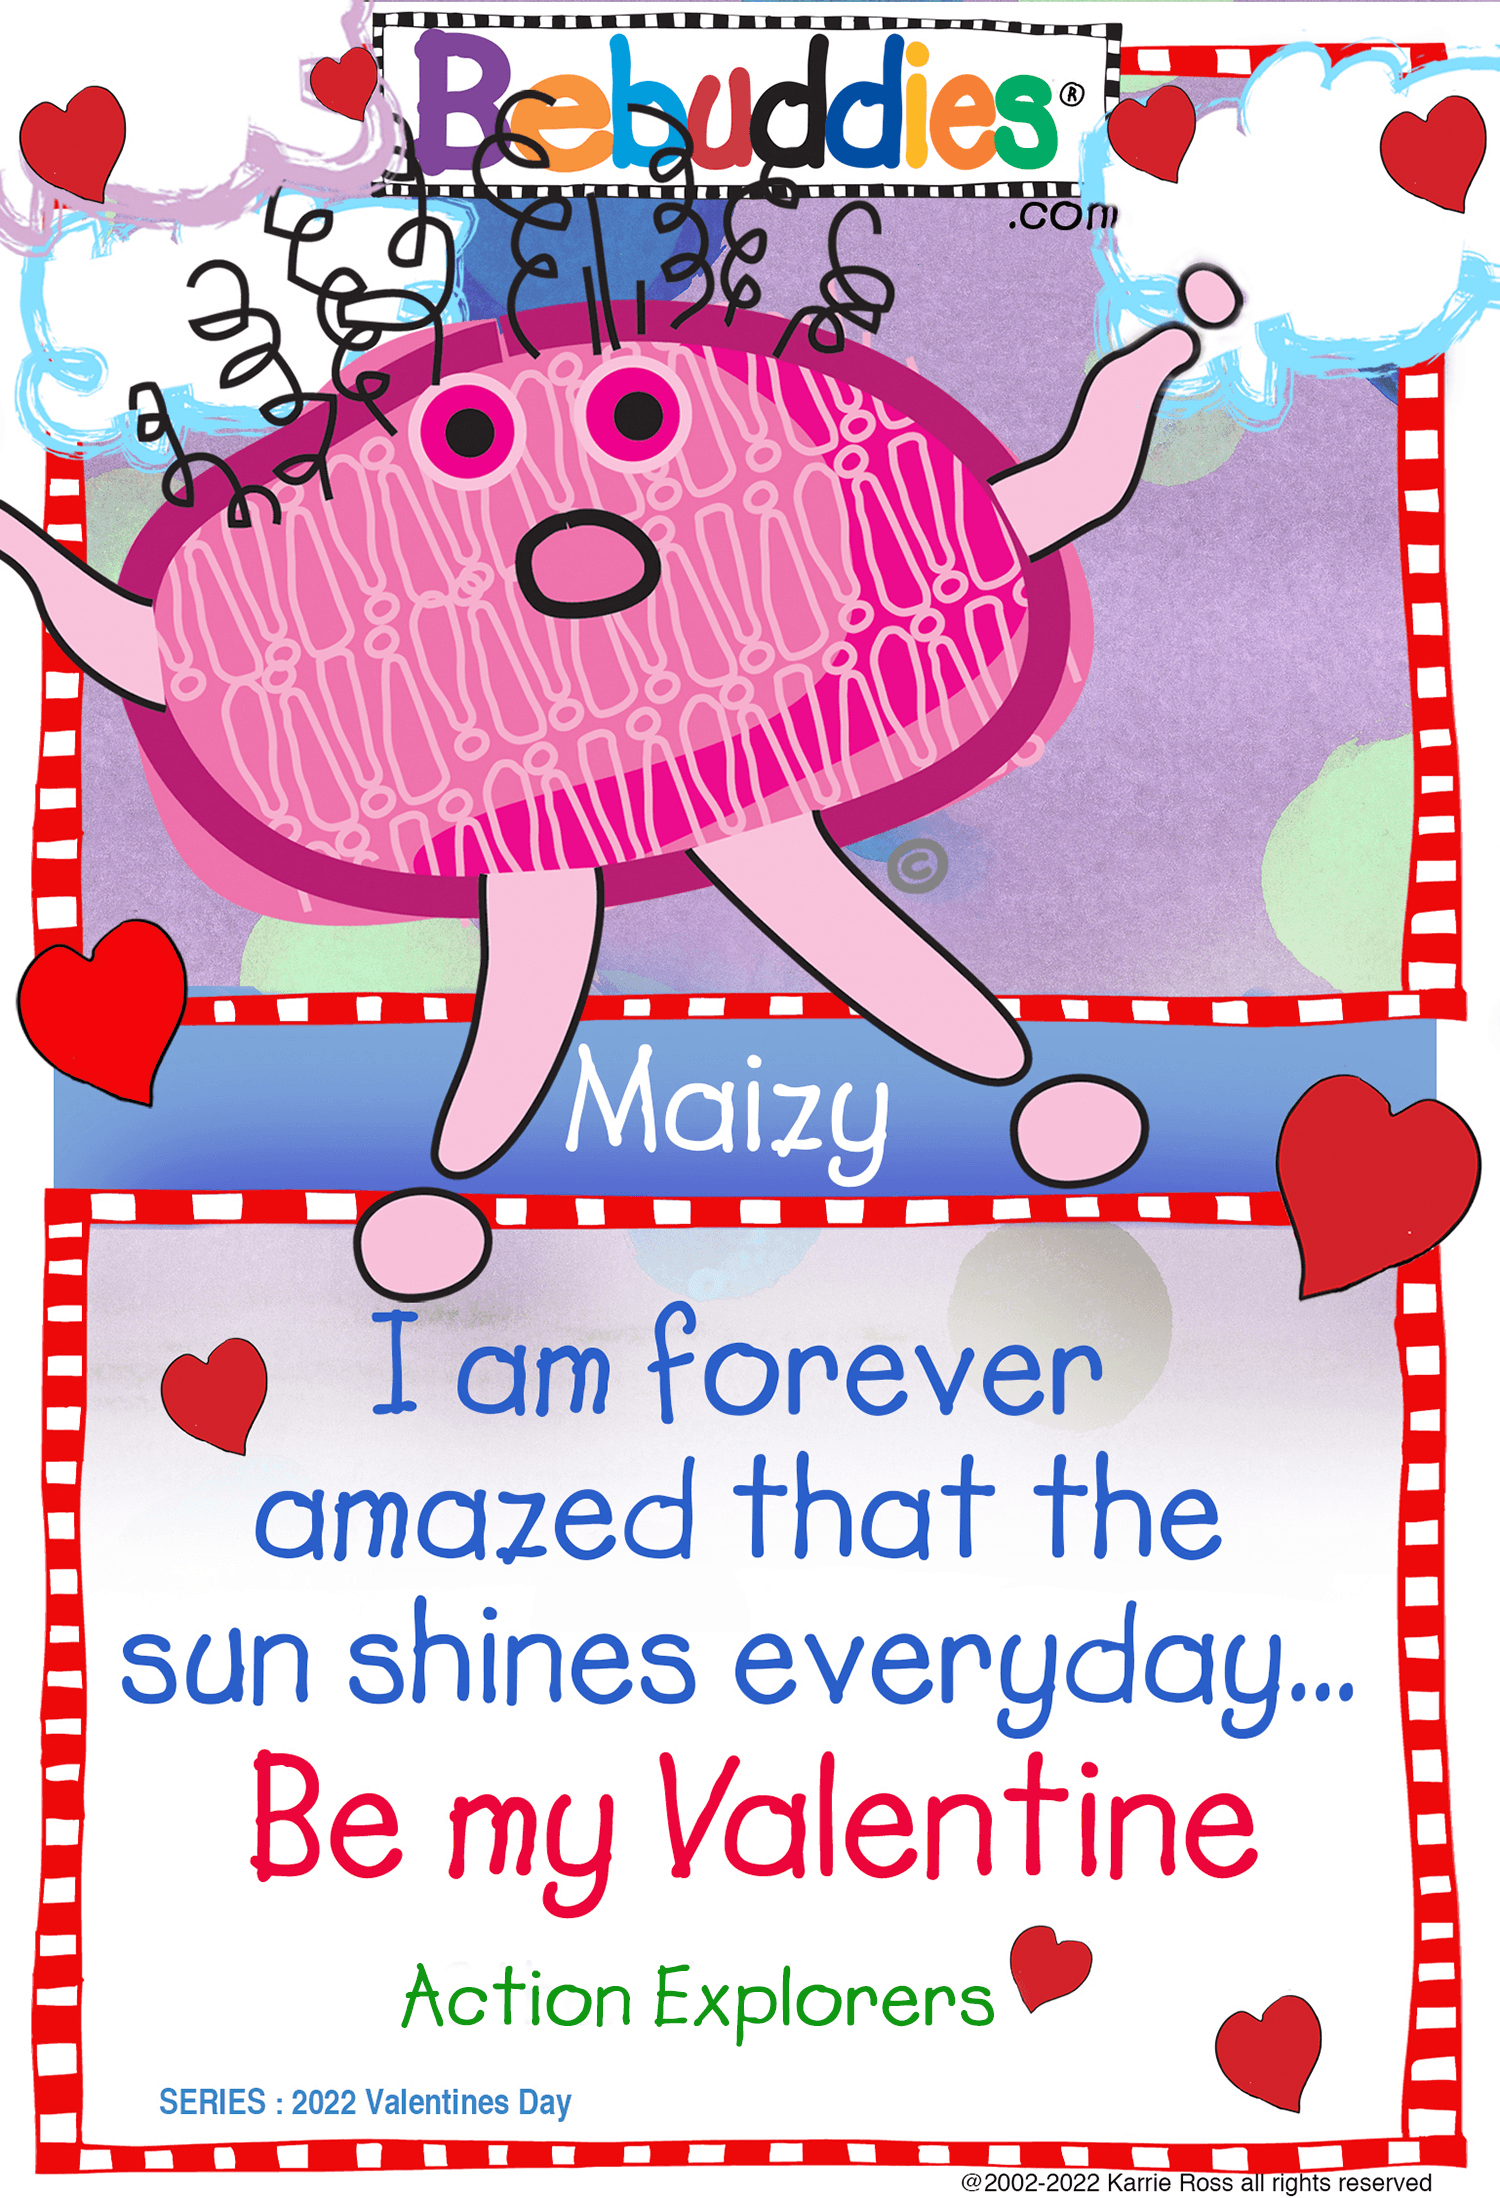 Bebuddies Holidays: Valentines Day by Karrie Ross : Maizy